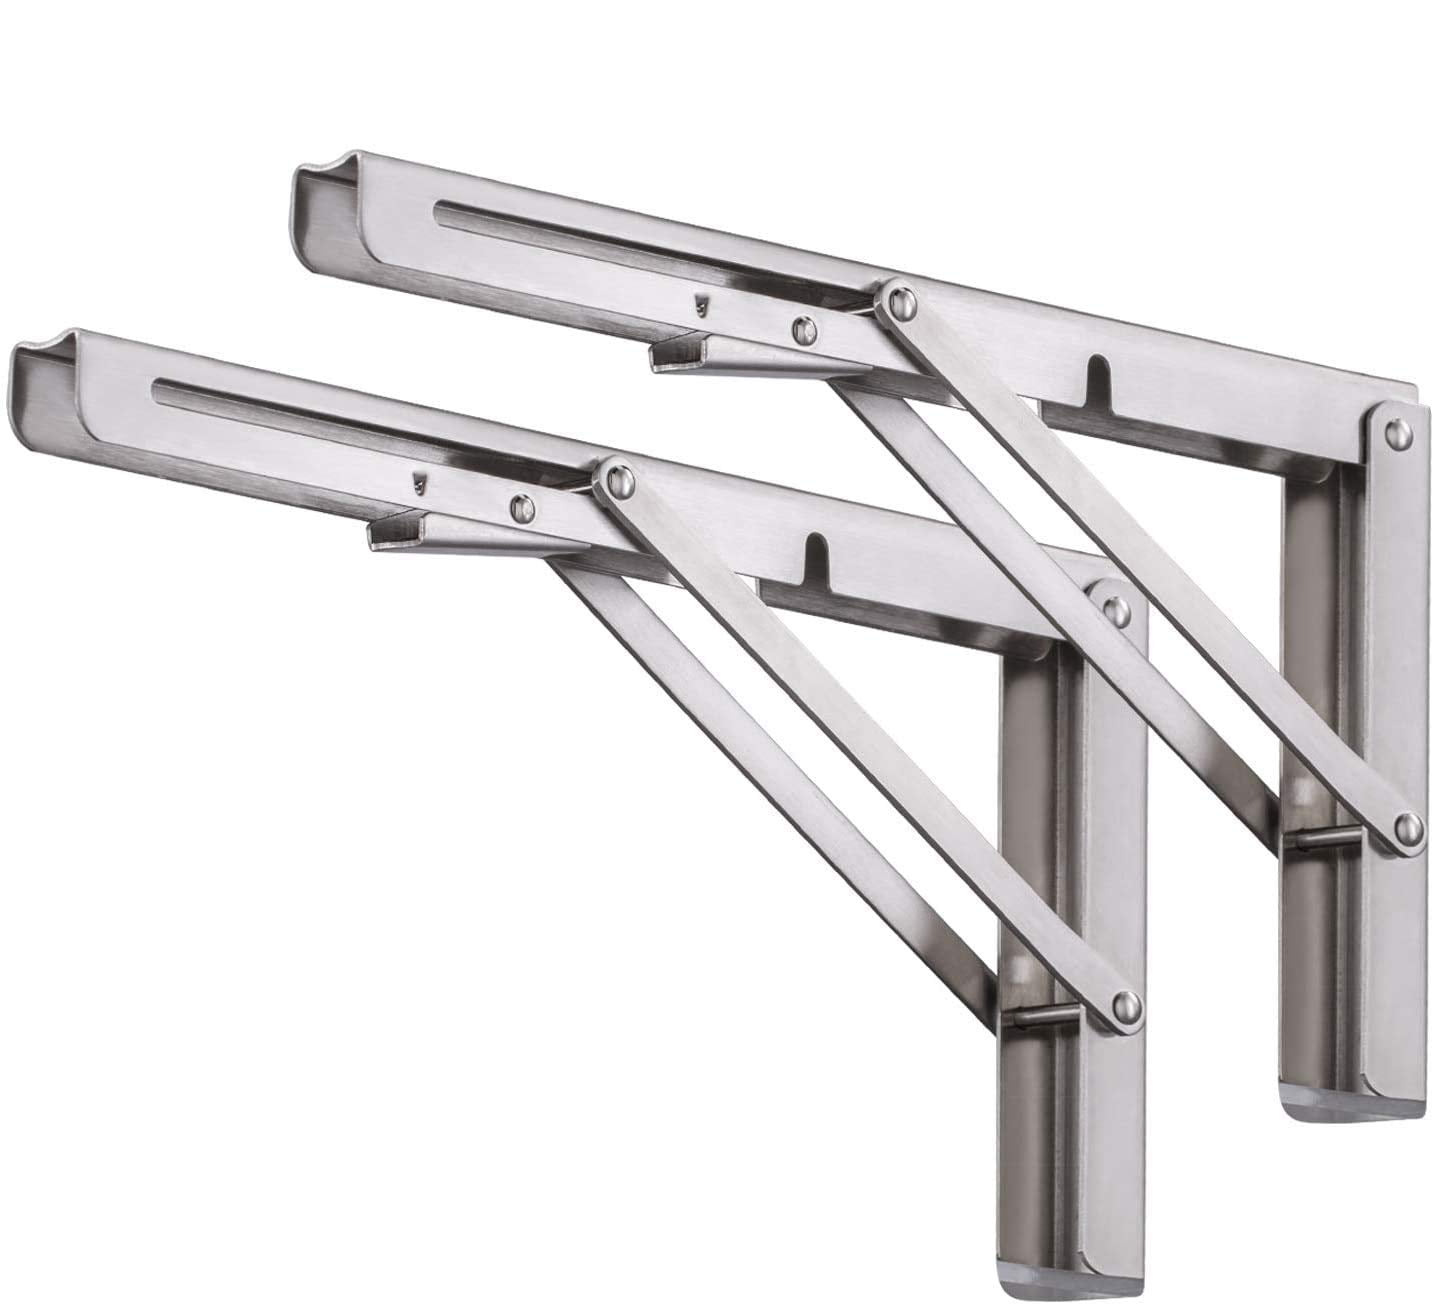 2X Stainless Steel 12" Folding Table Shelf Bracket Bench Support Self-Launching 